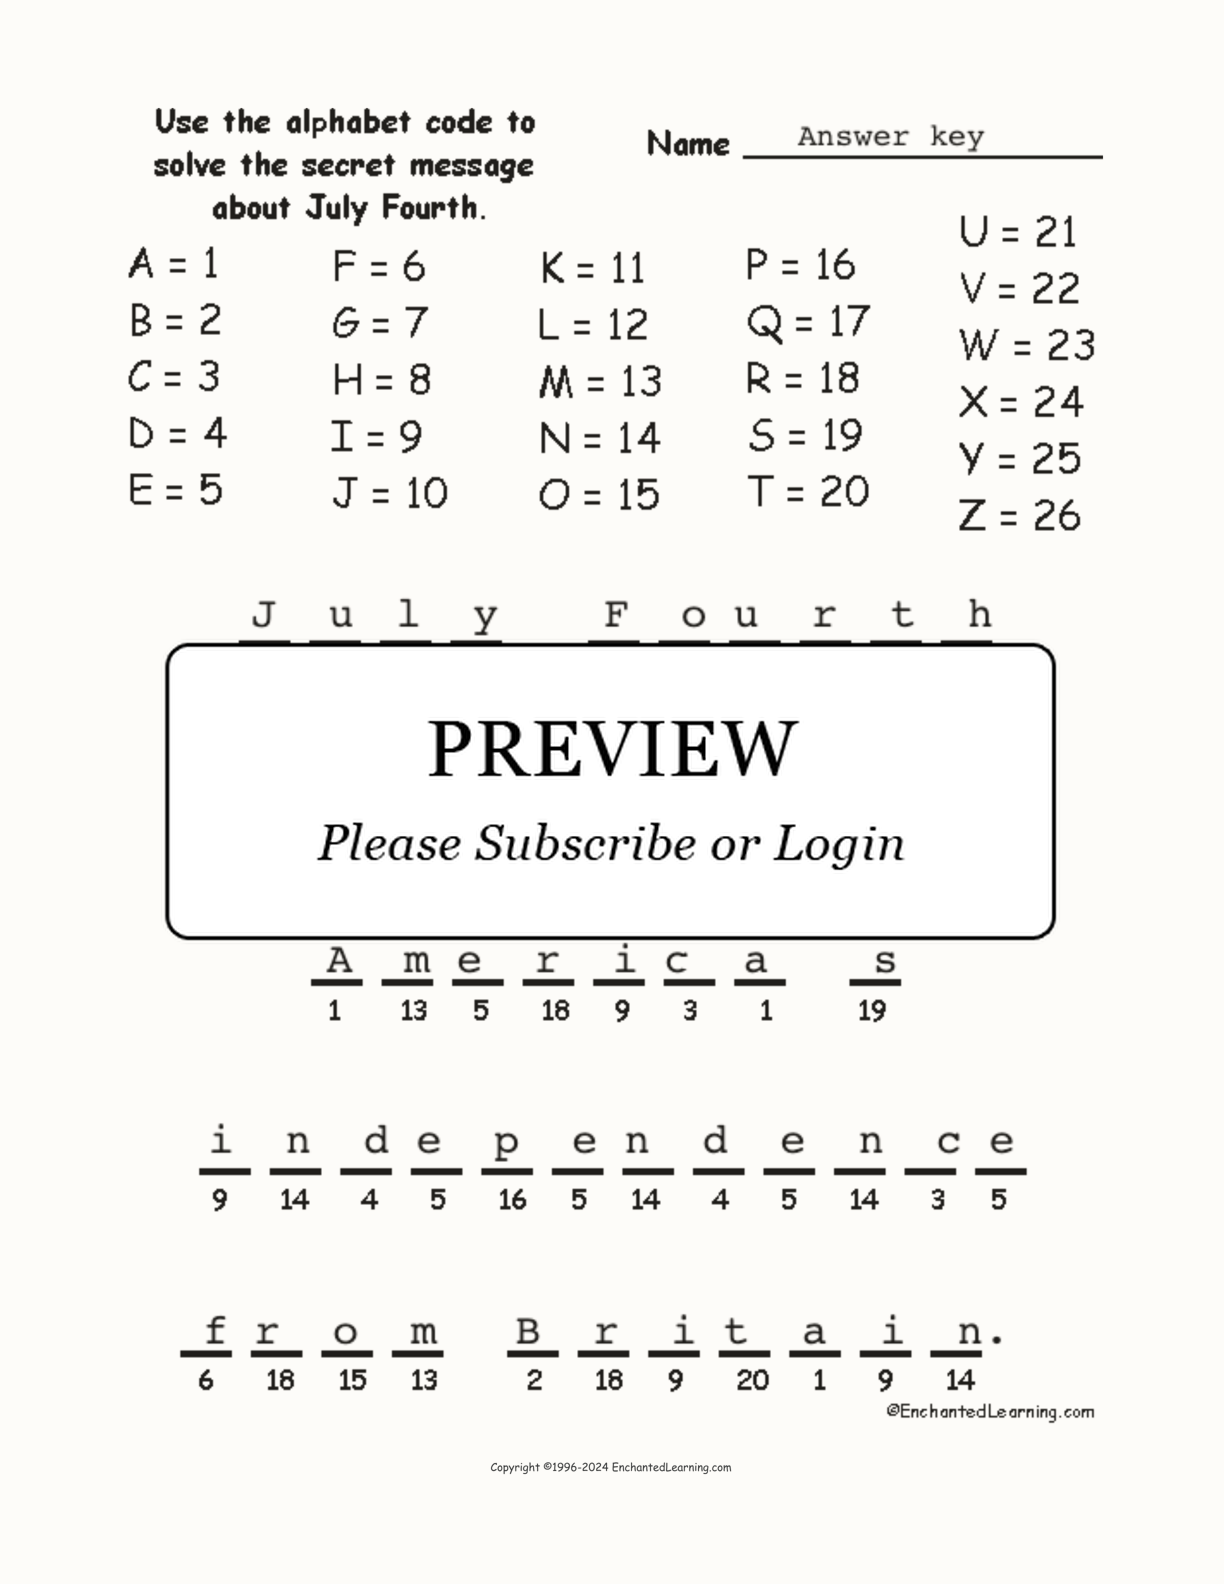 July Fourth Alphabet Code interactive worksheet page 2